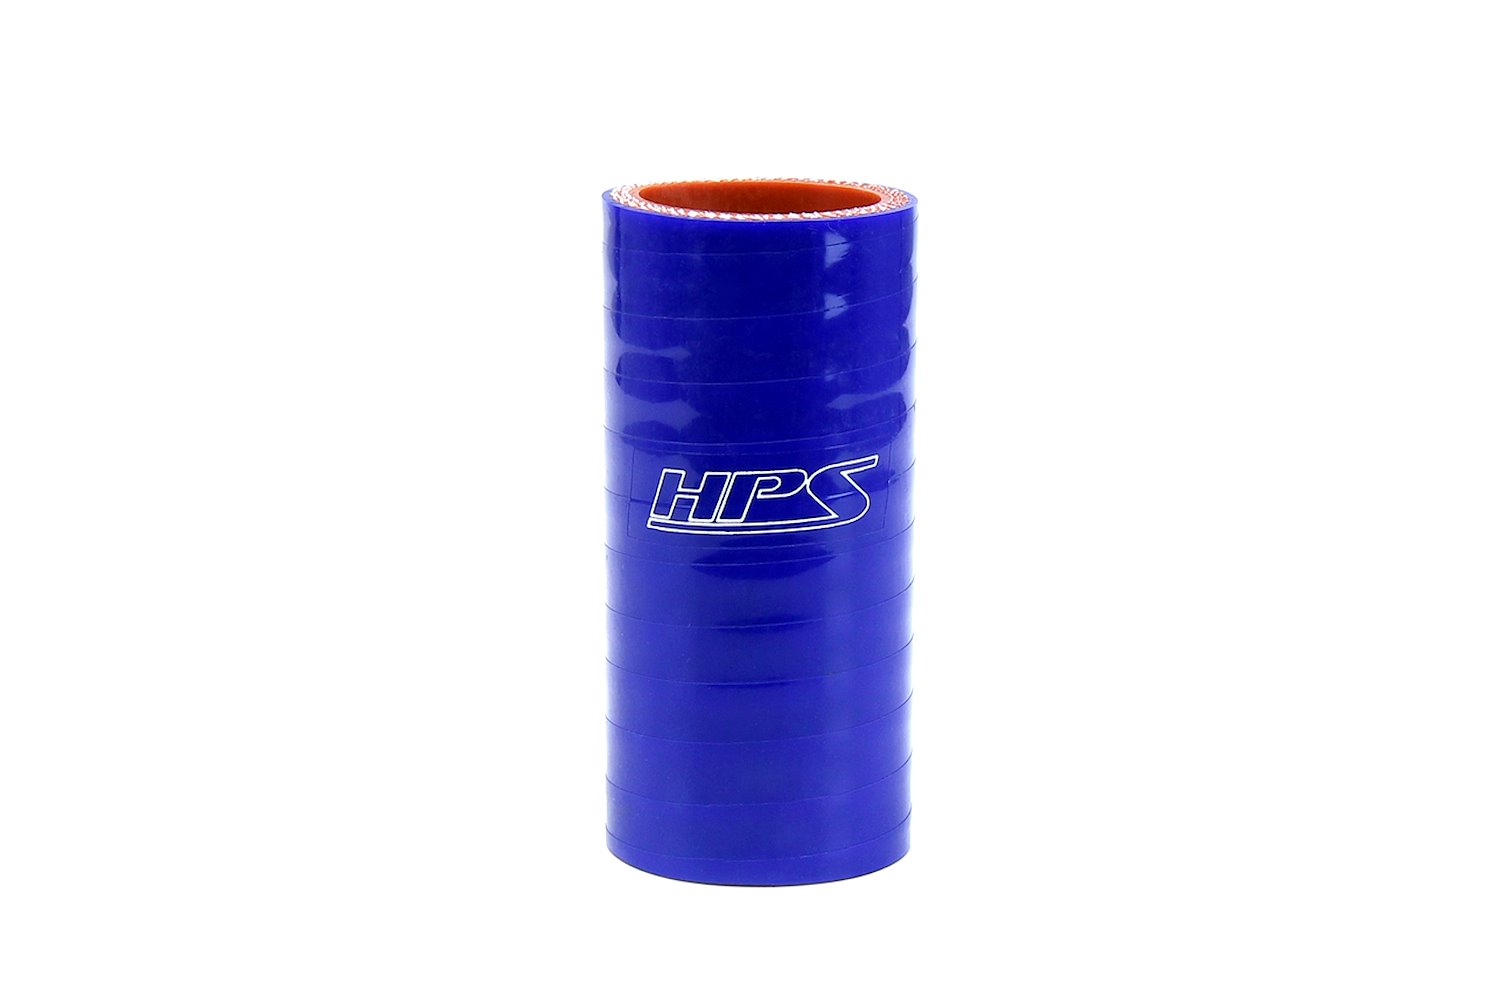 HTSC-175-BLUE Silicone Coupler Hose, High-Temp 4-Ply Reinforced, 1-3/4 in. ID, 3 in. Long, Blue